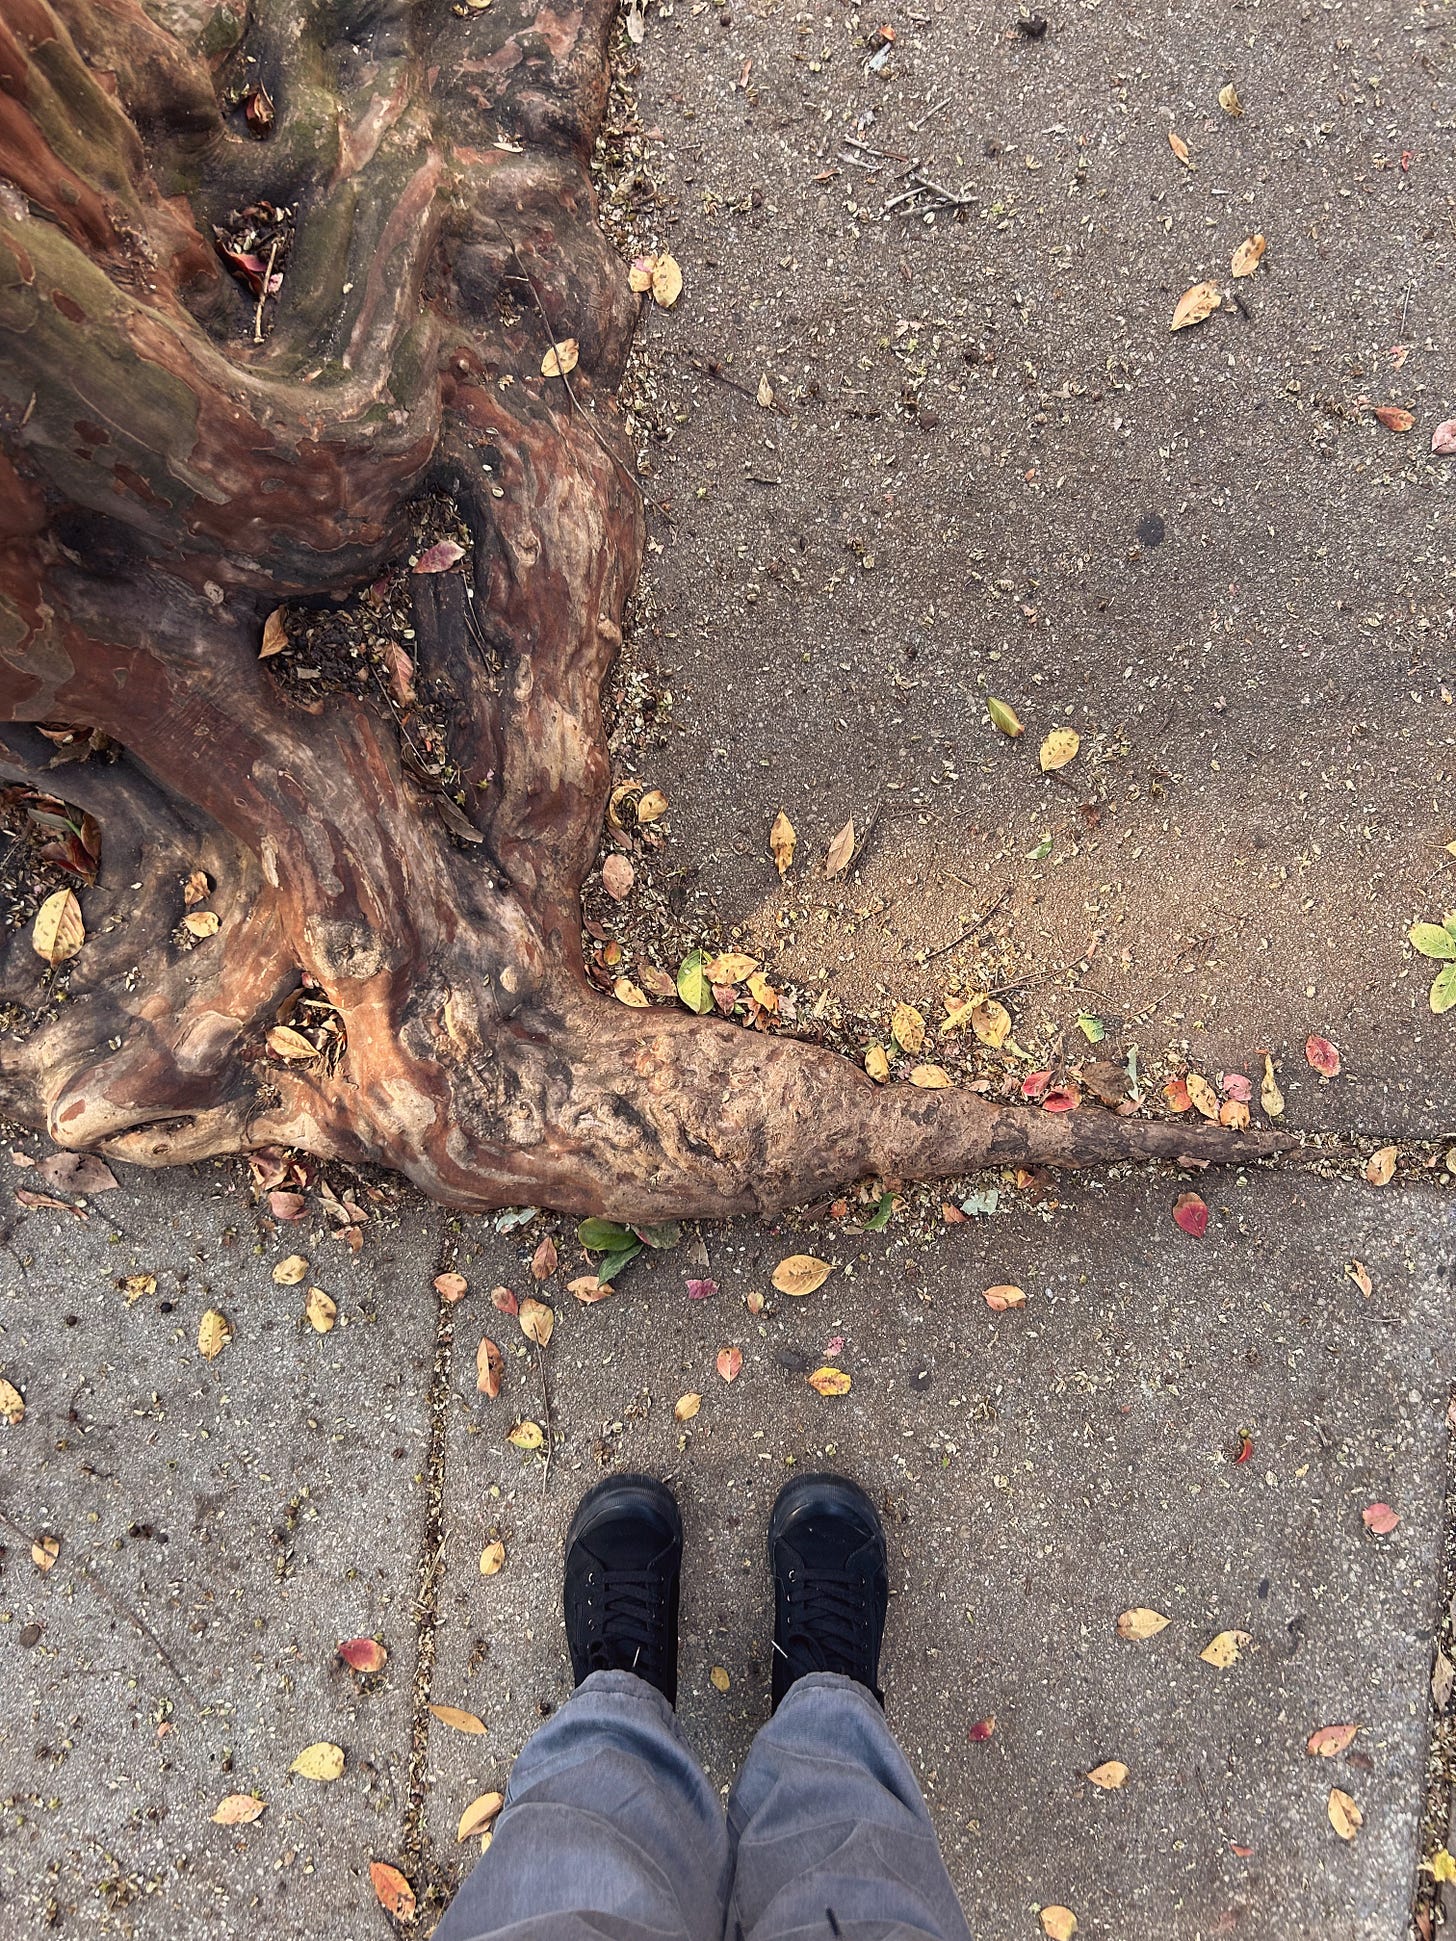 Black converse style shoes standing by roots and leaves in a sidewalk.